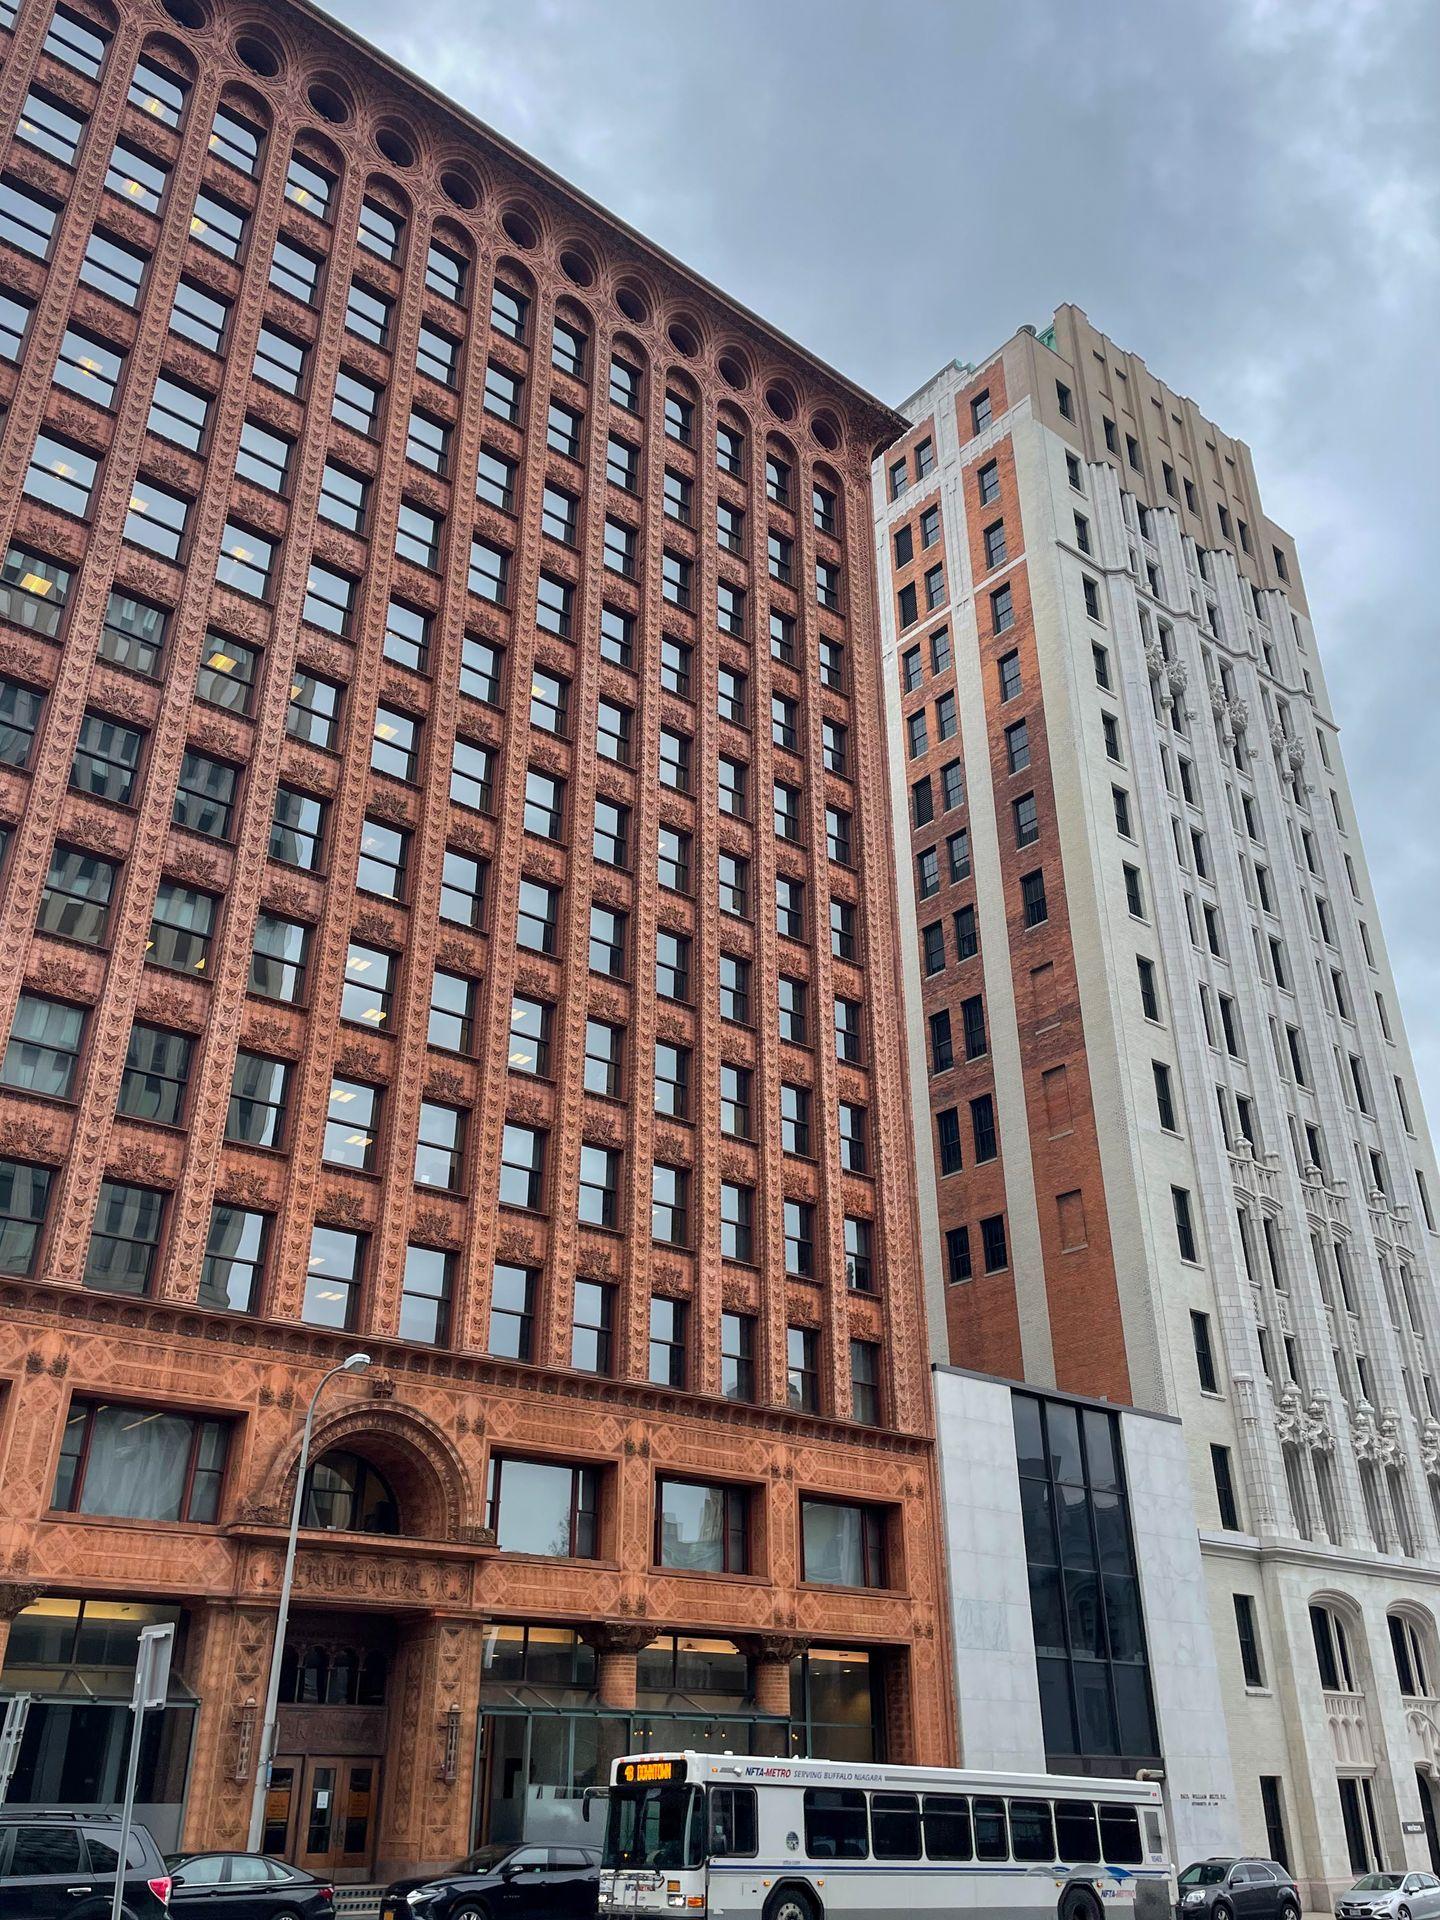 A tall brown buillding next to a white building in downtown Buffalo.